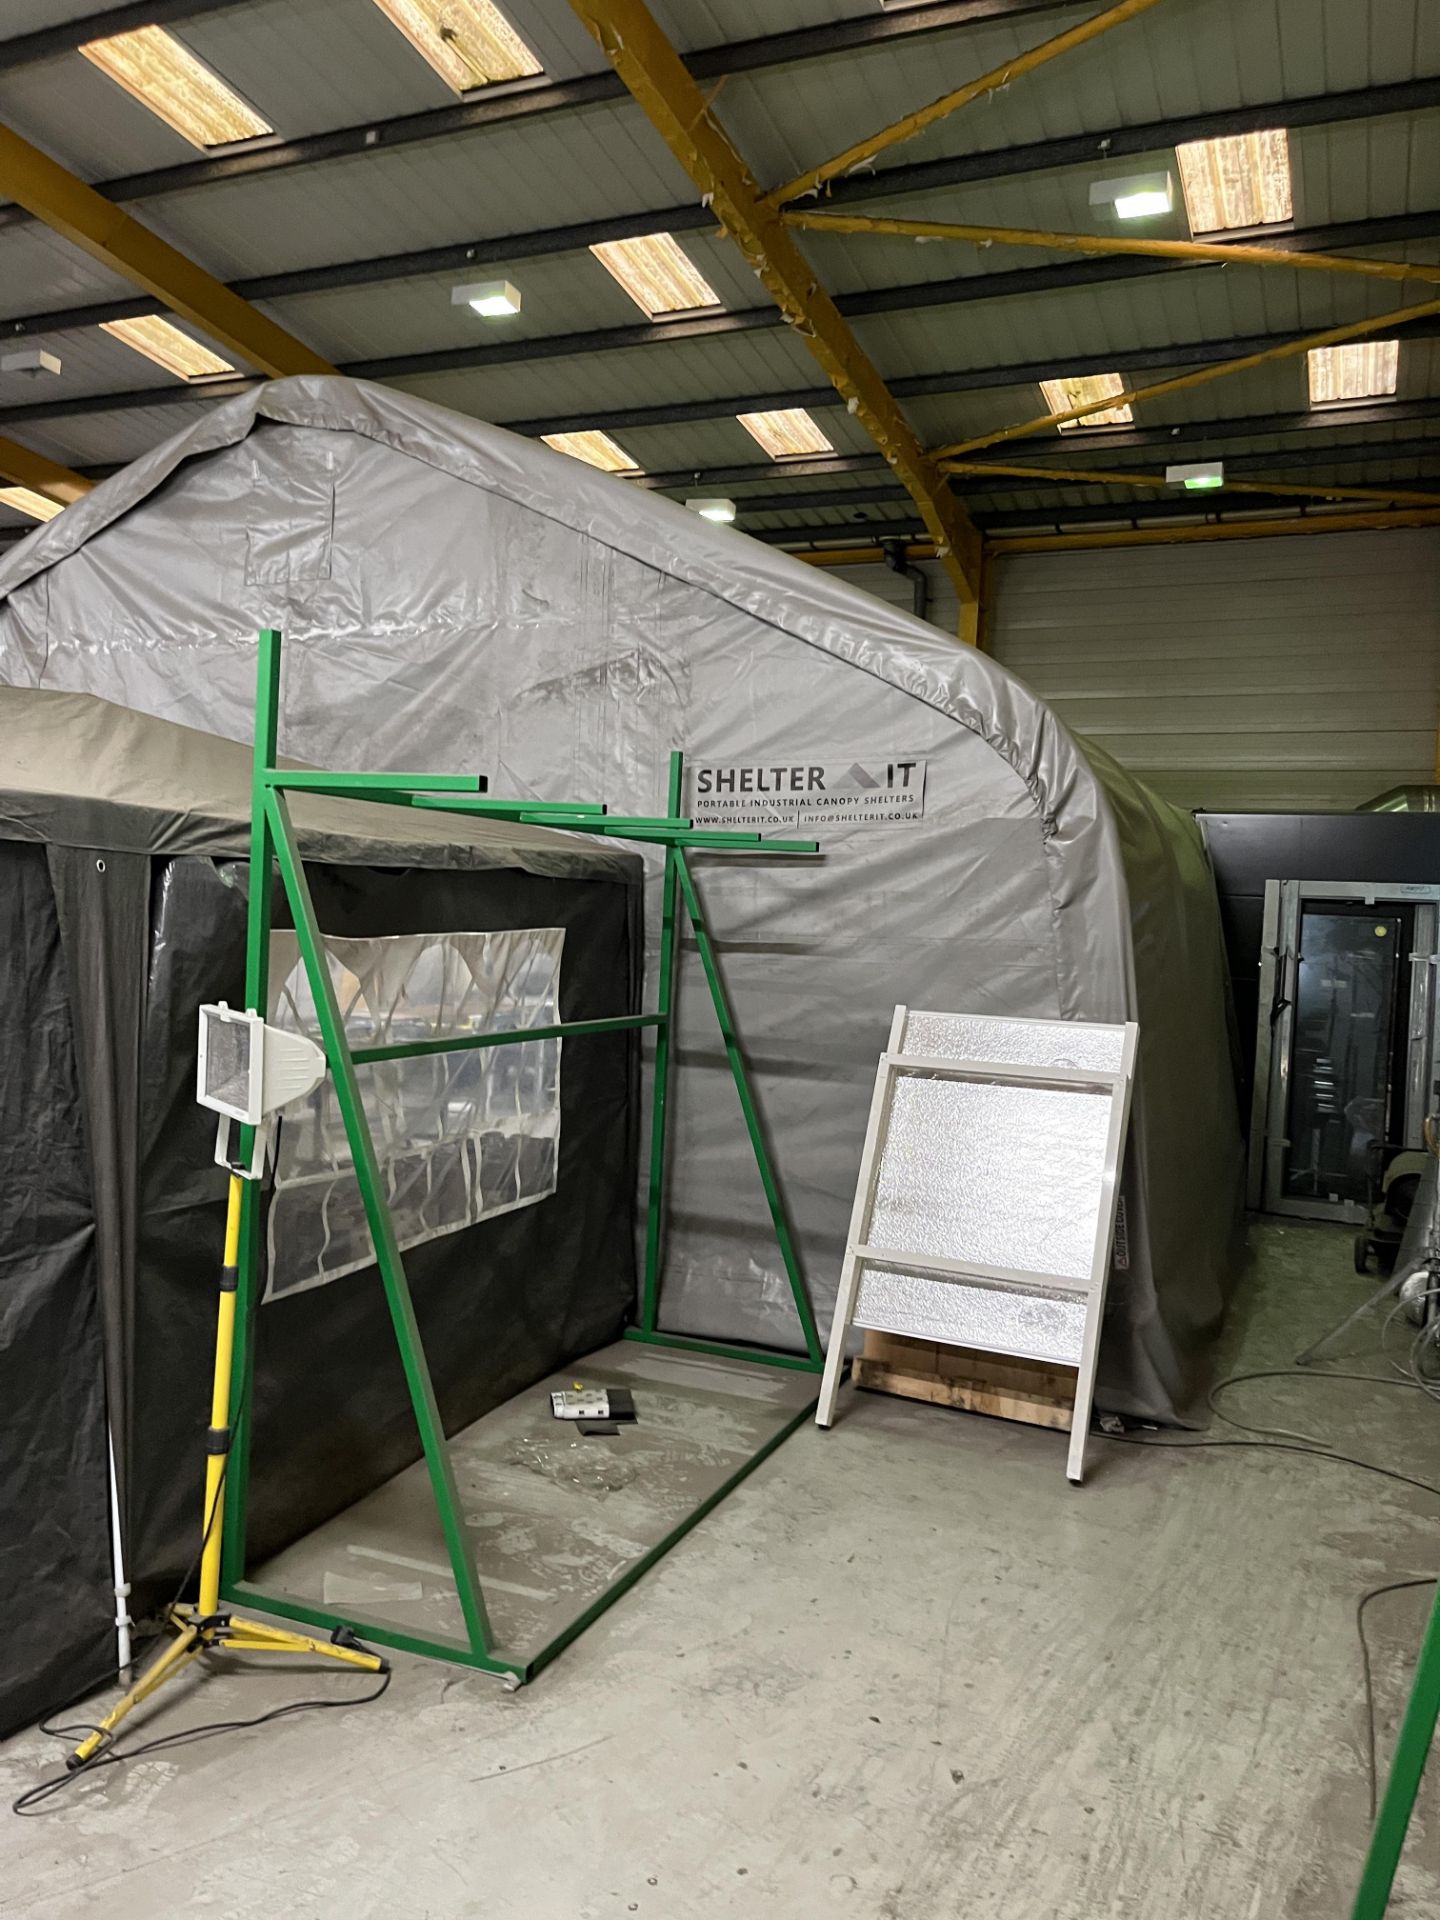 Shelter IT Portable Industrial Canopy Shelter - Image 2 of 3